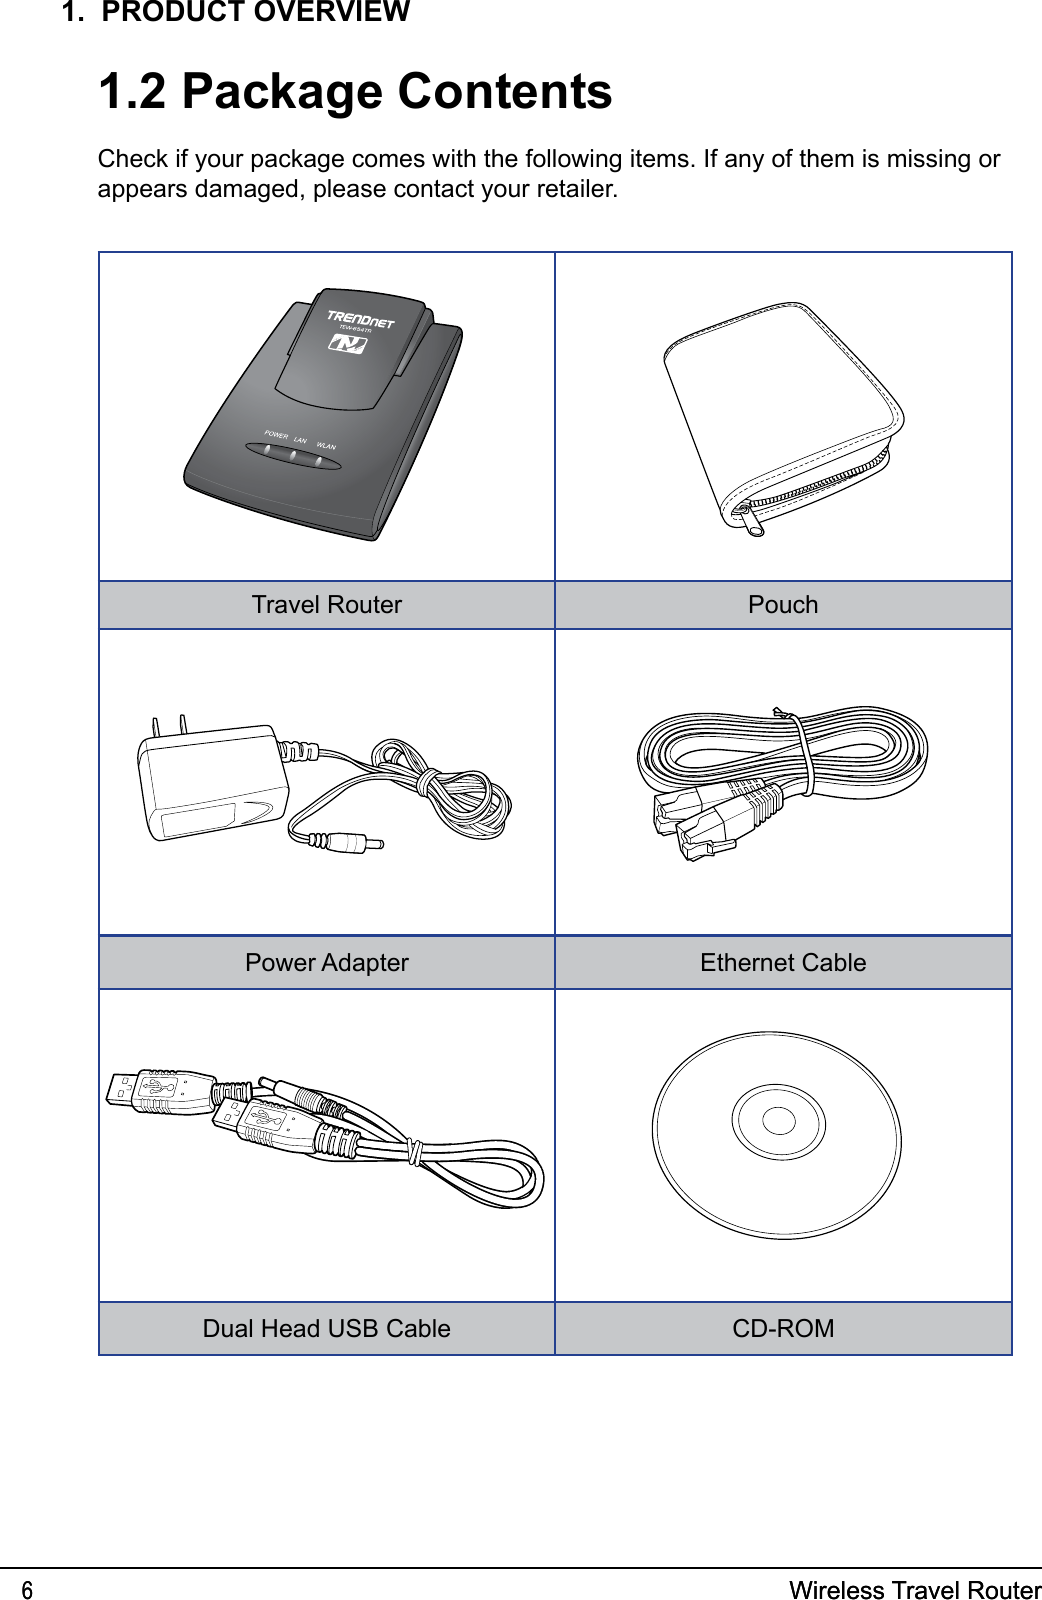 Wireless Travel Router6Wireless Travel Router61.  PRODUCT OVERVIEW1.2 Package ContentsCheck if your package comes with the following items. If any of them is missing or appears damaged, please contact your retailer.Travel Router PouchPower Adapter Ethernet CableDual Head USB Cable CD-ROM